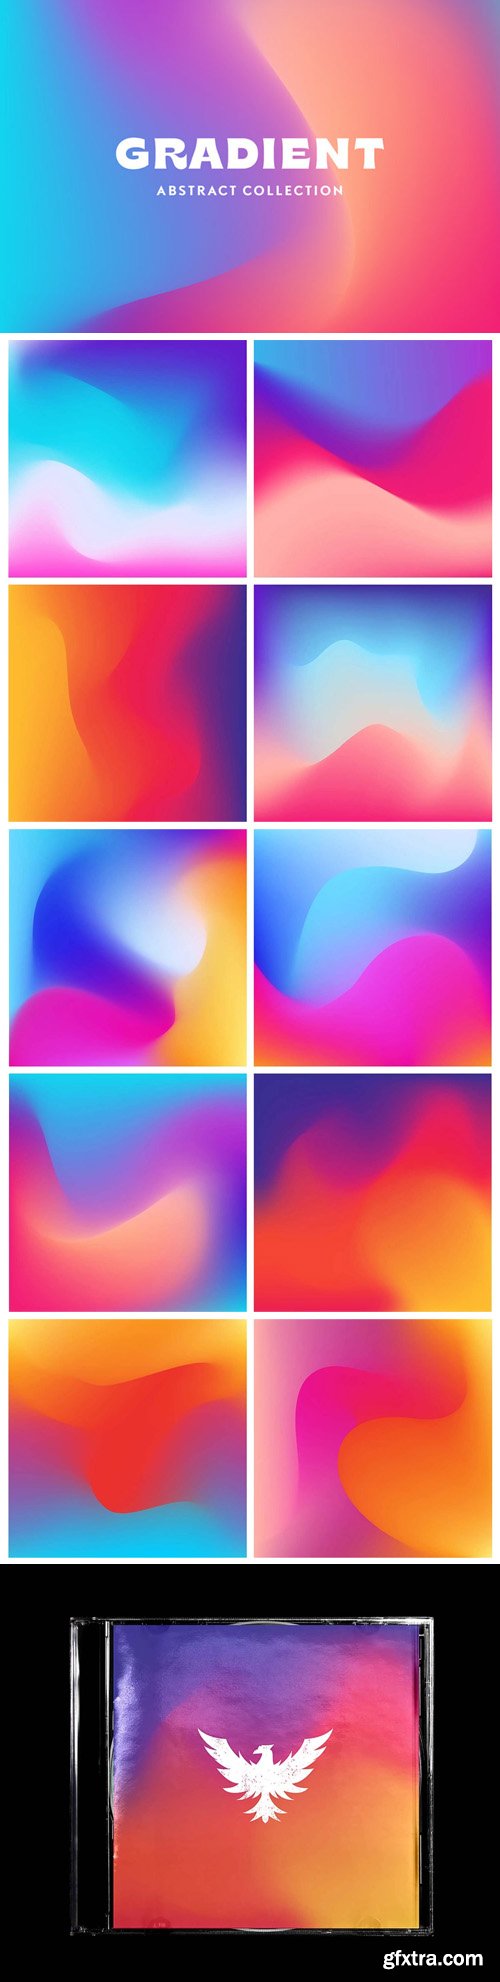 Abstract Gradient Textures for Illustrator